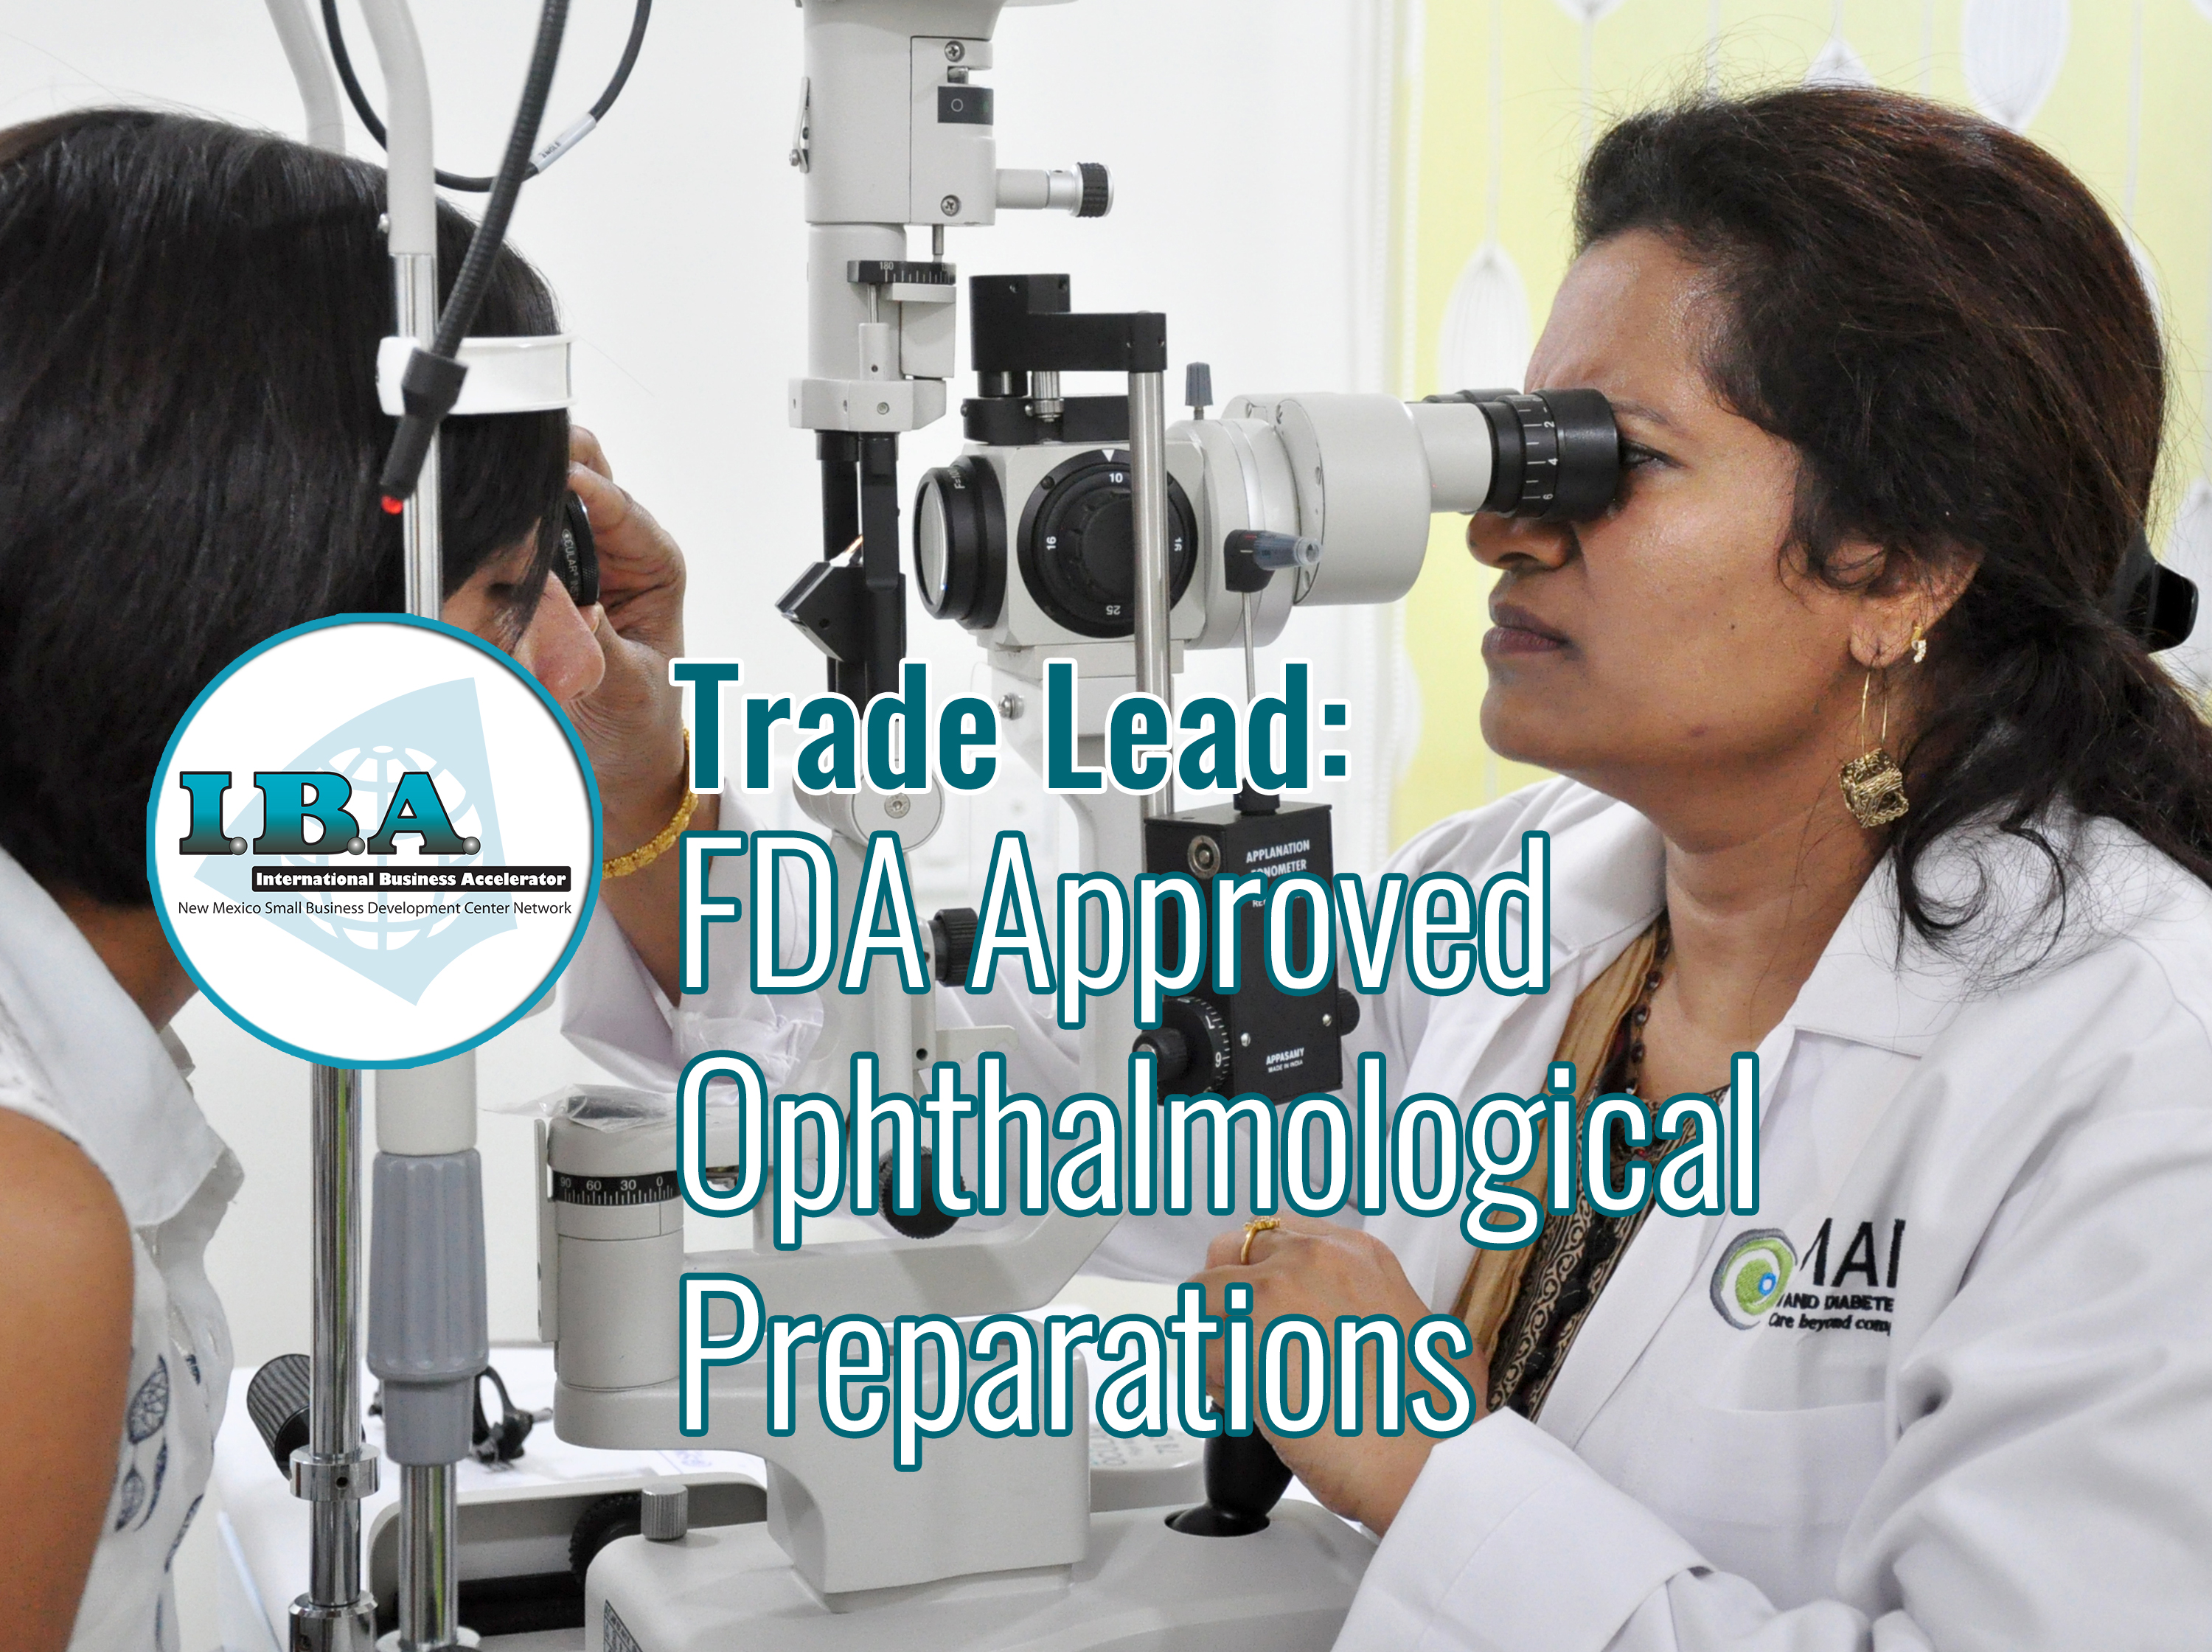 Trade Lead – Ophthalmological Preparations